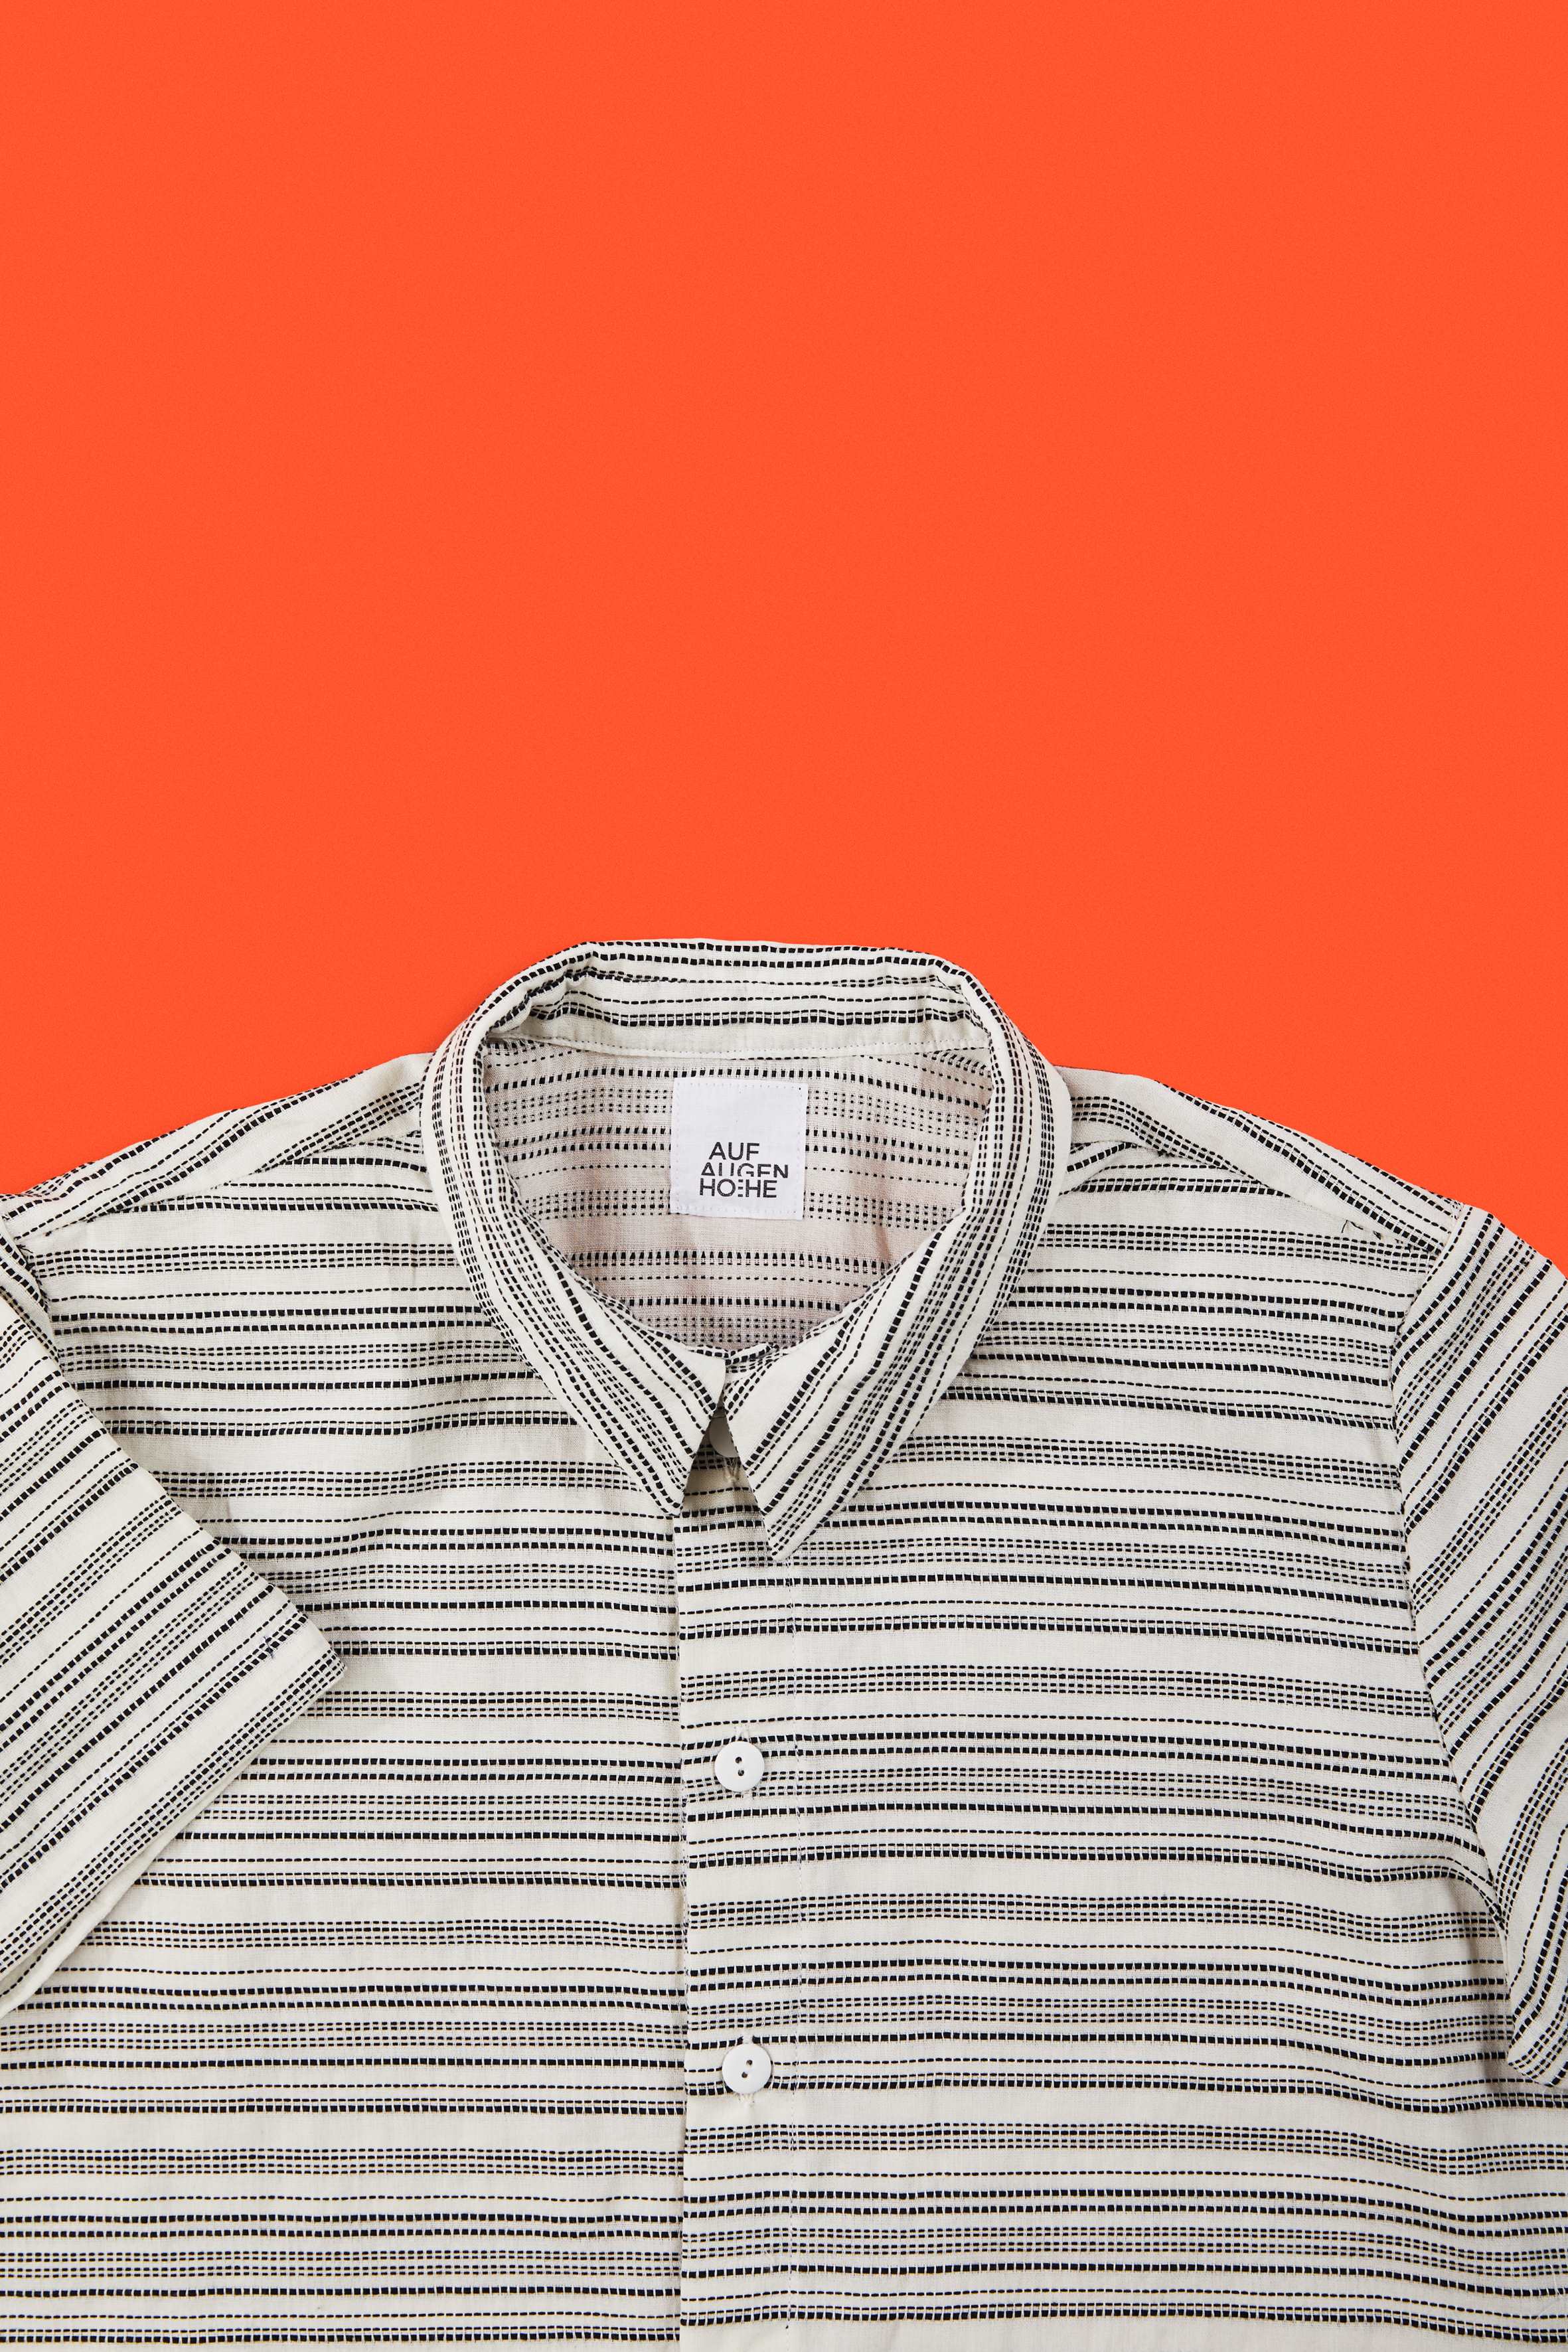 detailed view of black and white striped shirt collar against orange background